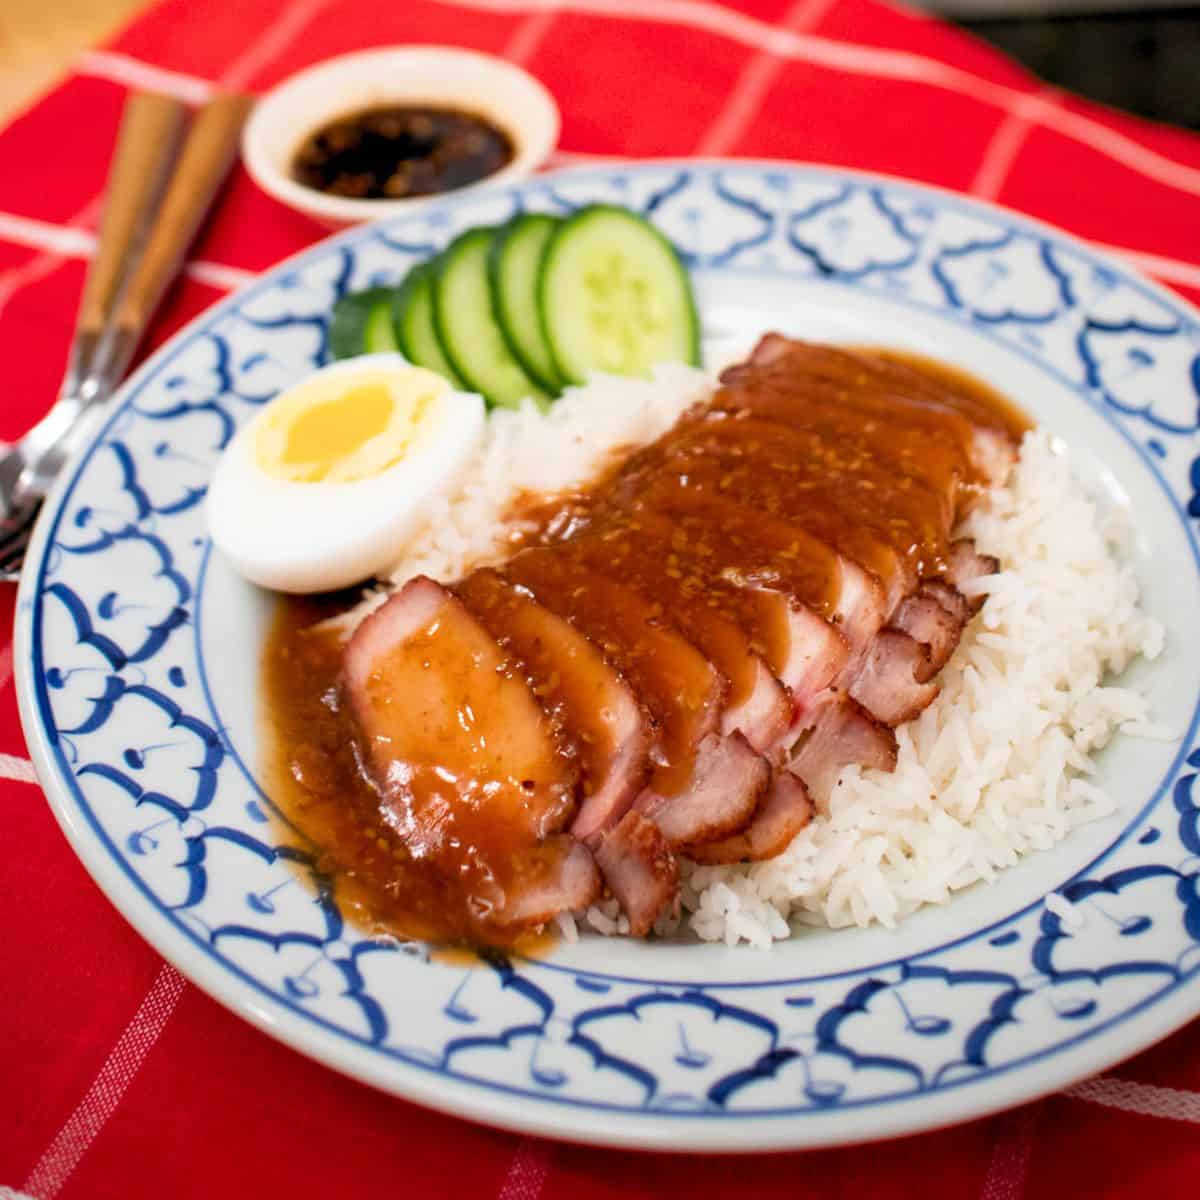 a plate of kao moo dang with a side of cucumber and boiled eggs and a bowl of dark soy sauce